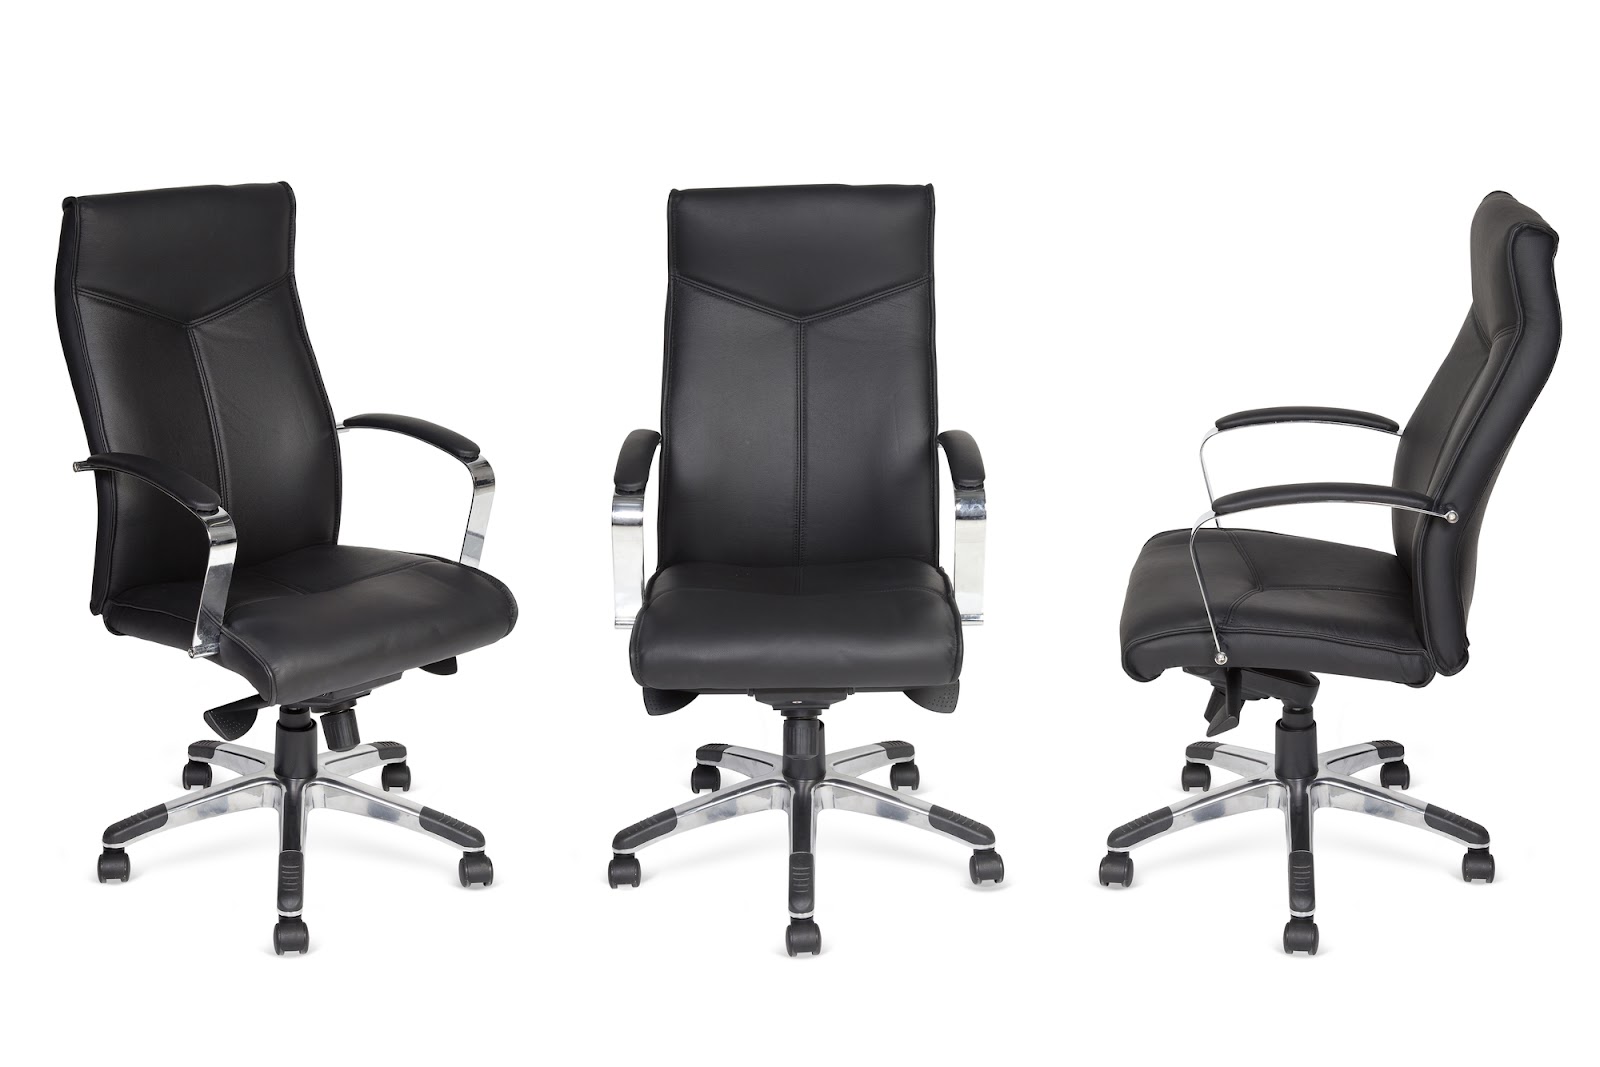 Business office chairs for comfortable working environment